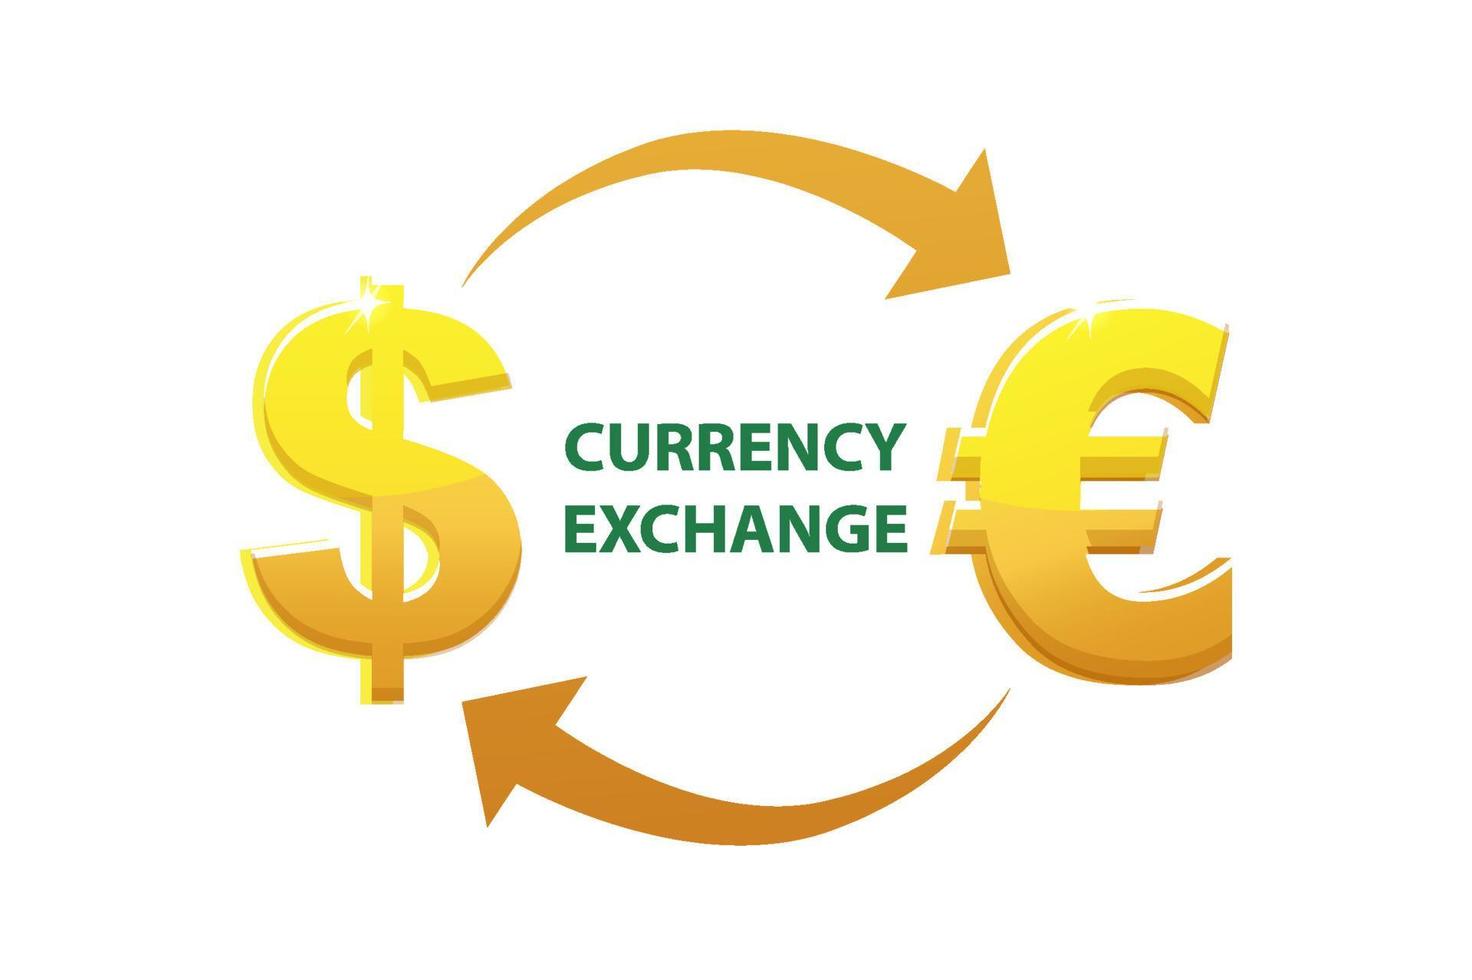 Euro and dollar currency exchange and signs. Gold money or currency icons. vector